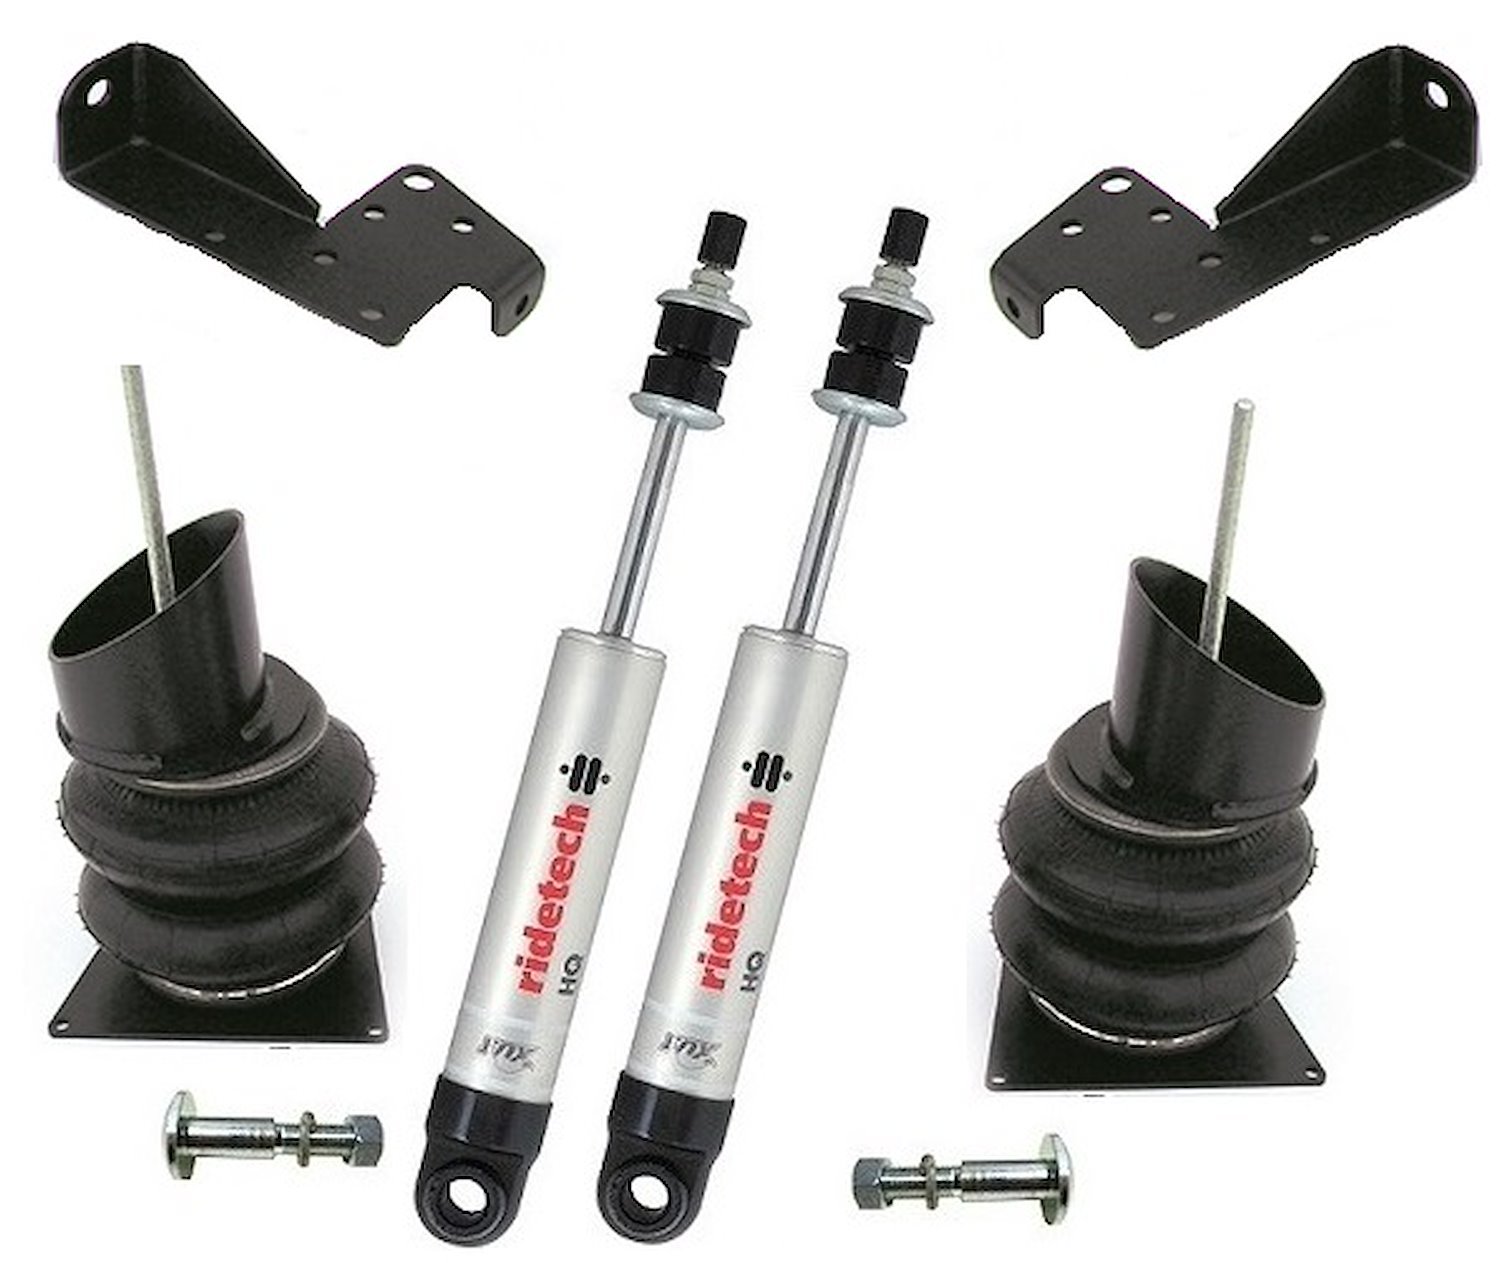 Front CoolRide kit for 58-64 Impala. For use w/ stock lower arms. Includes air springs/ brackets/ HQ